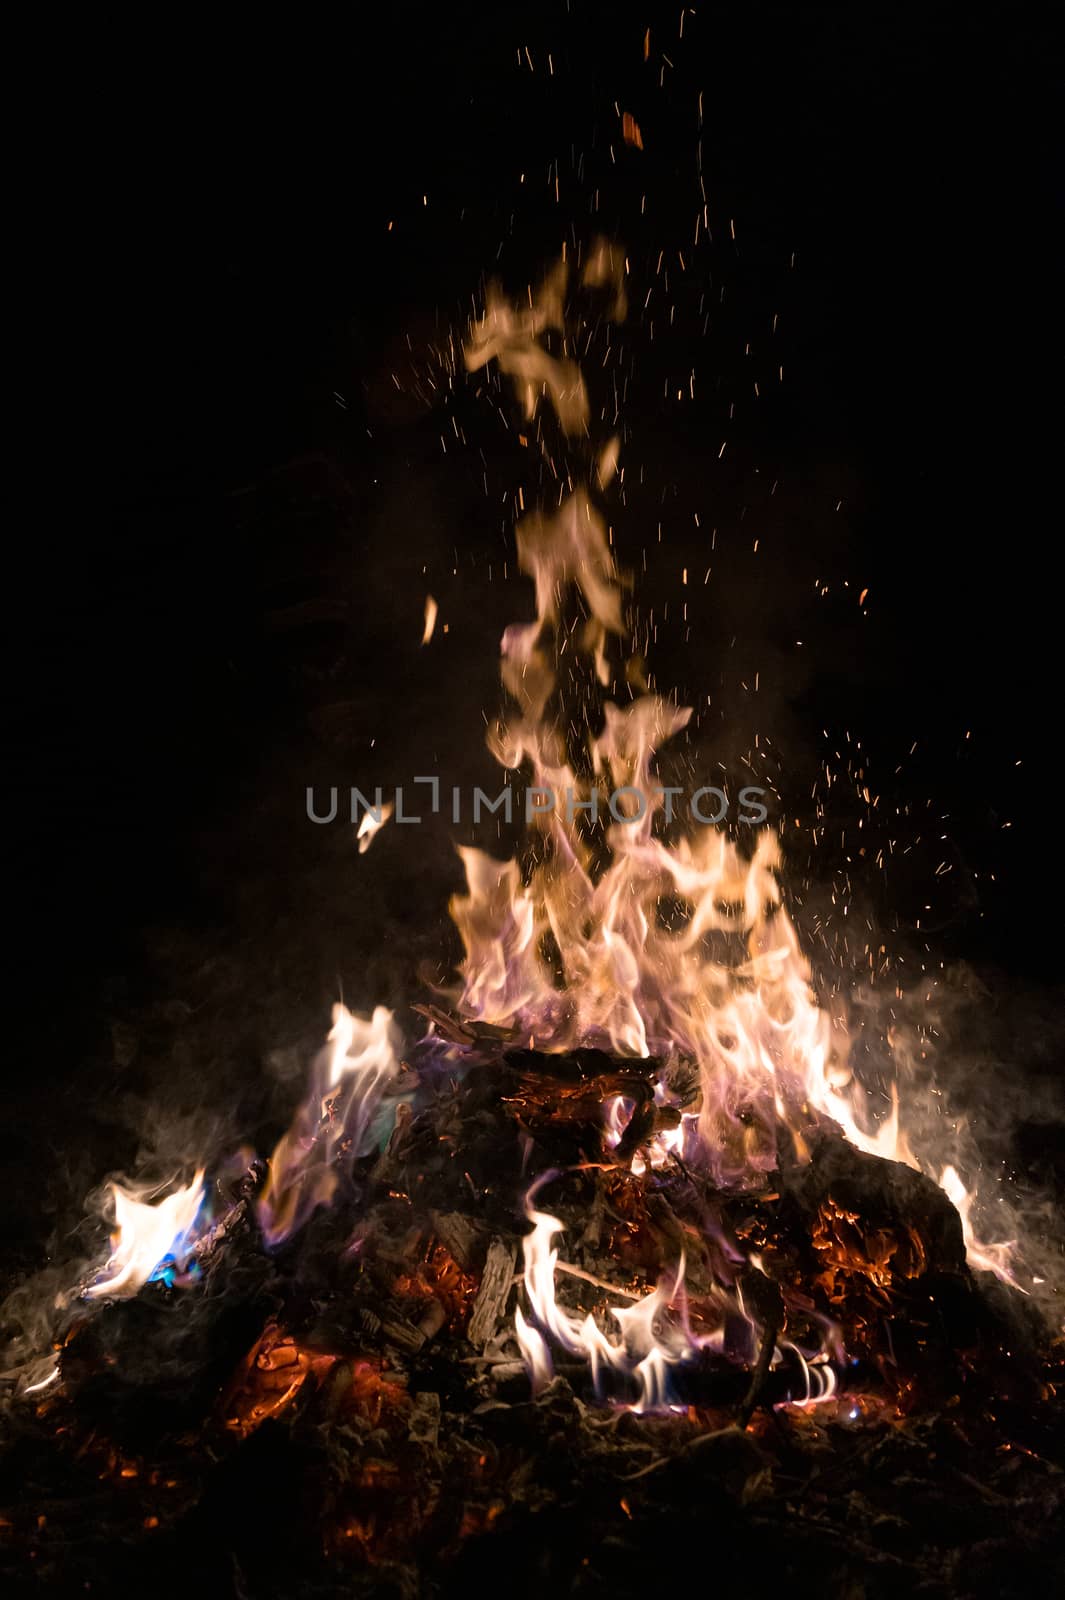 A low light underexposed photo of burning fire. by alexsdriver